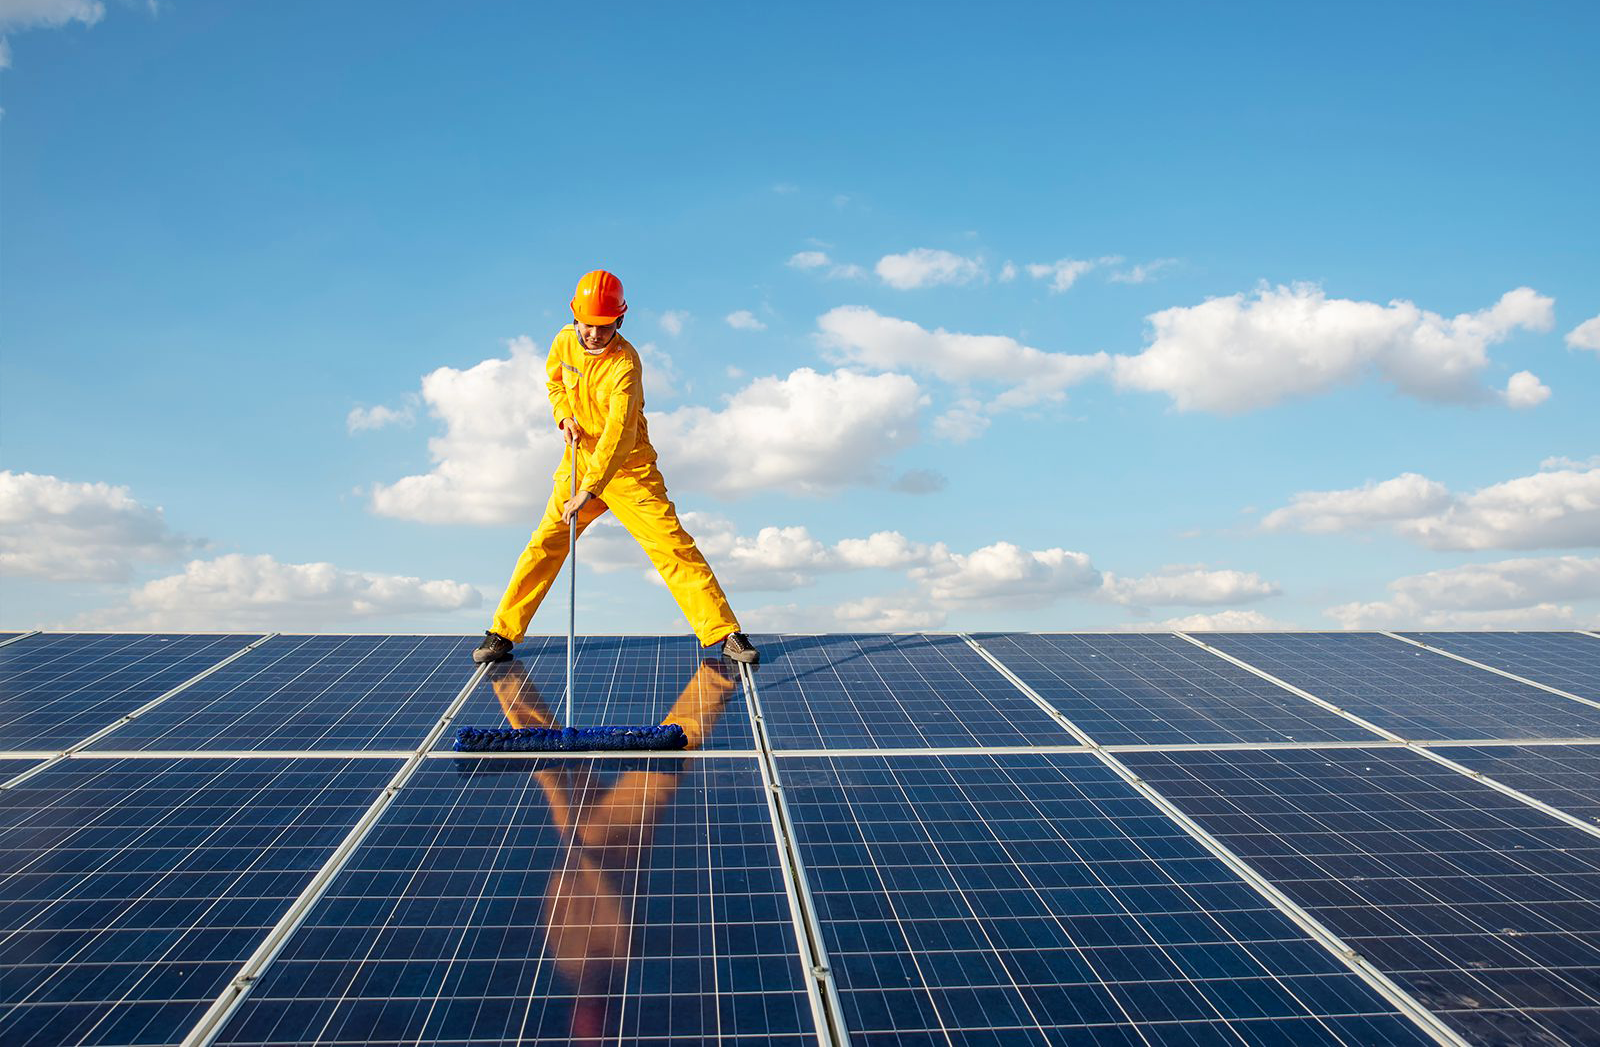 Changes and invariance behind the high growth of photovoltaic industry